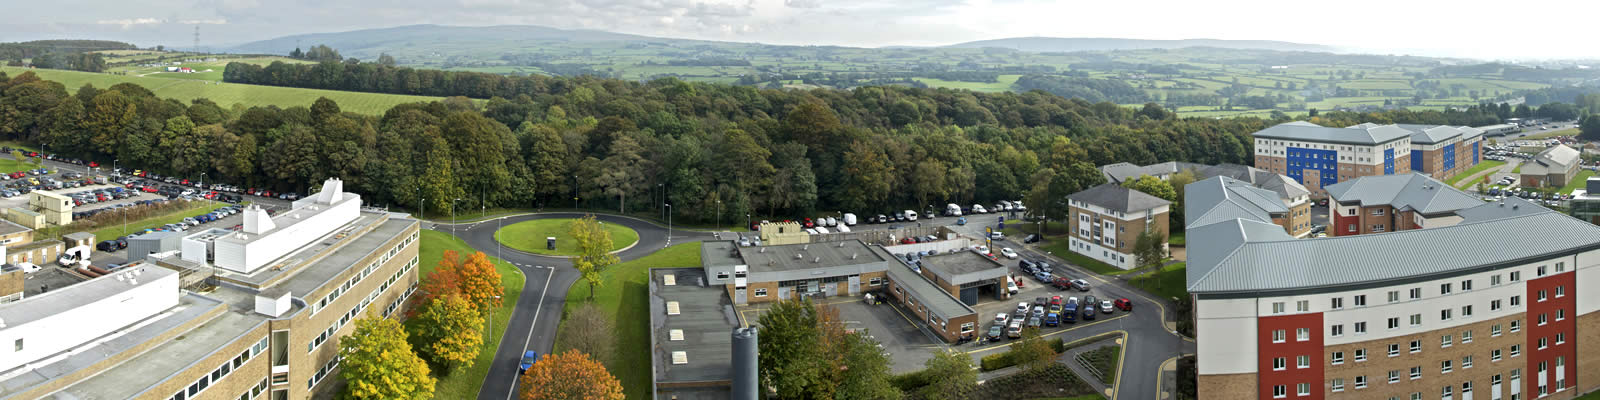 Lancaster Campus panorama view from above